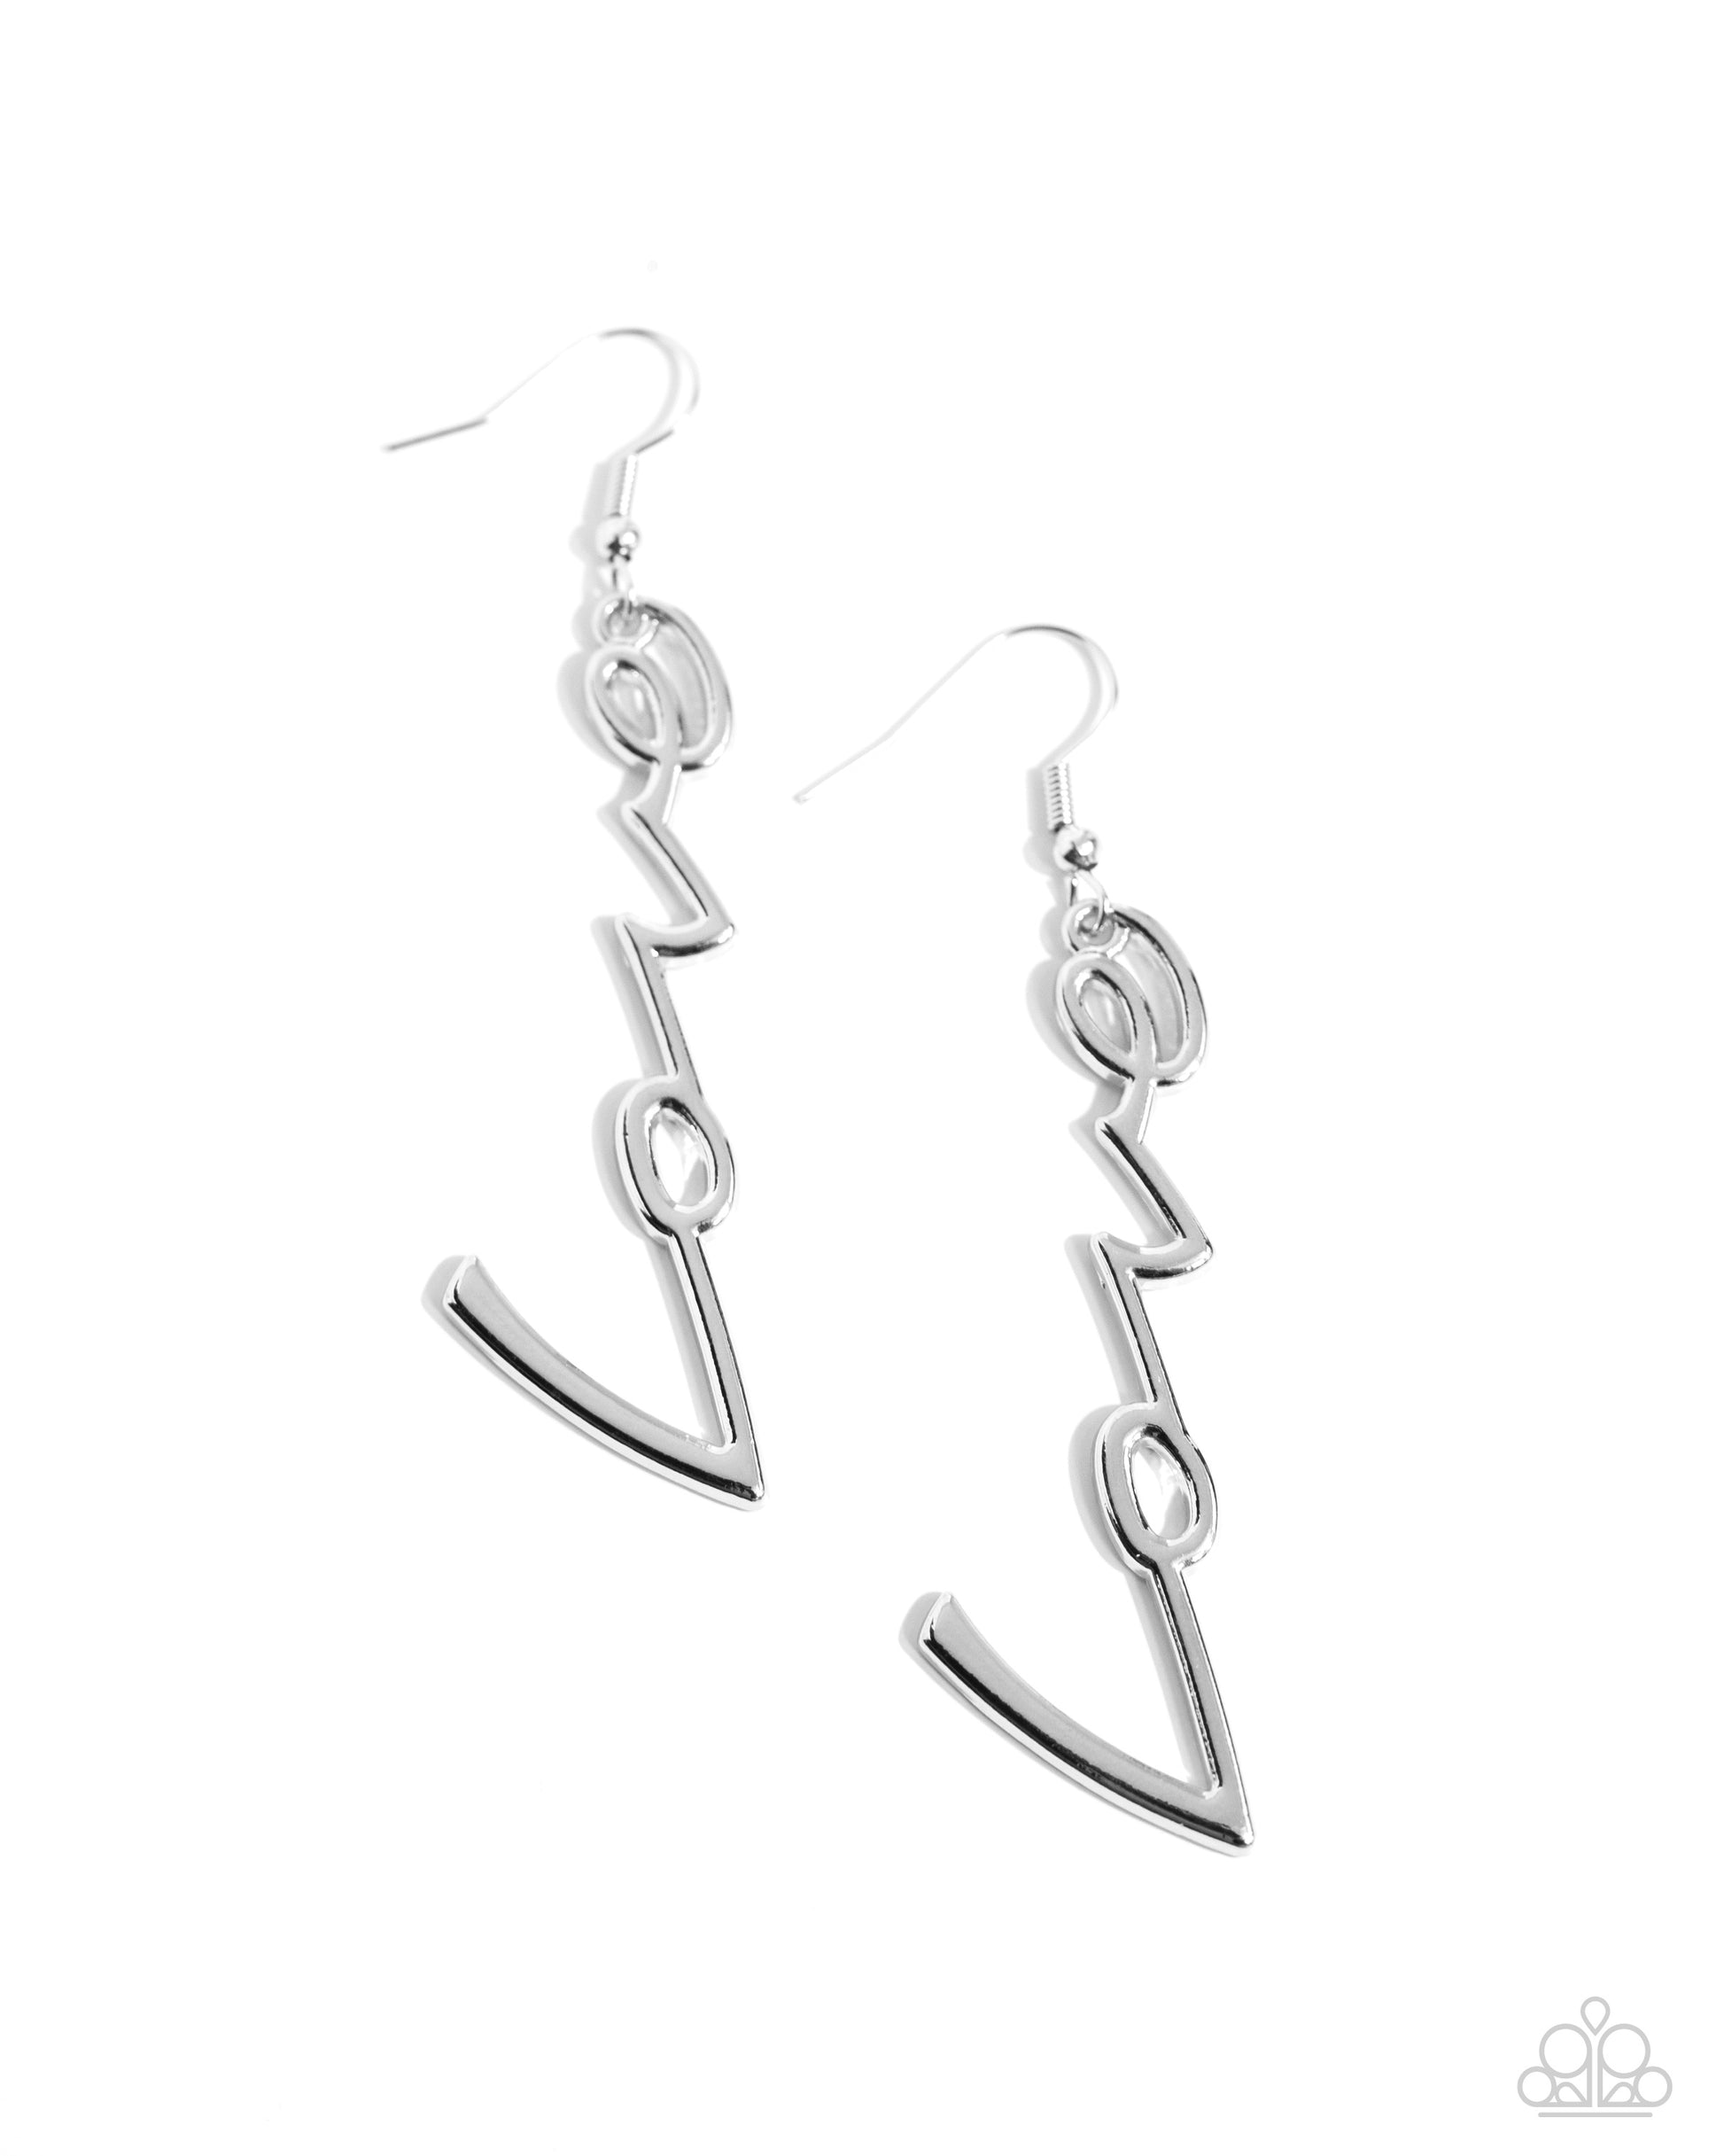 Light-Catching Letters Silver "Love" Earring - Paparazzi Accessories Featuring a slanted, cursive font, high-sheen silver letters spell out the word "love" for a simply sentimental statement. Earring attaches to a standard fishhook fitting. Sold as one pair of earrings. SKU: P5WD-SVXX-117XX